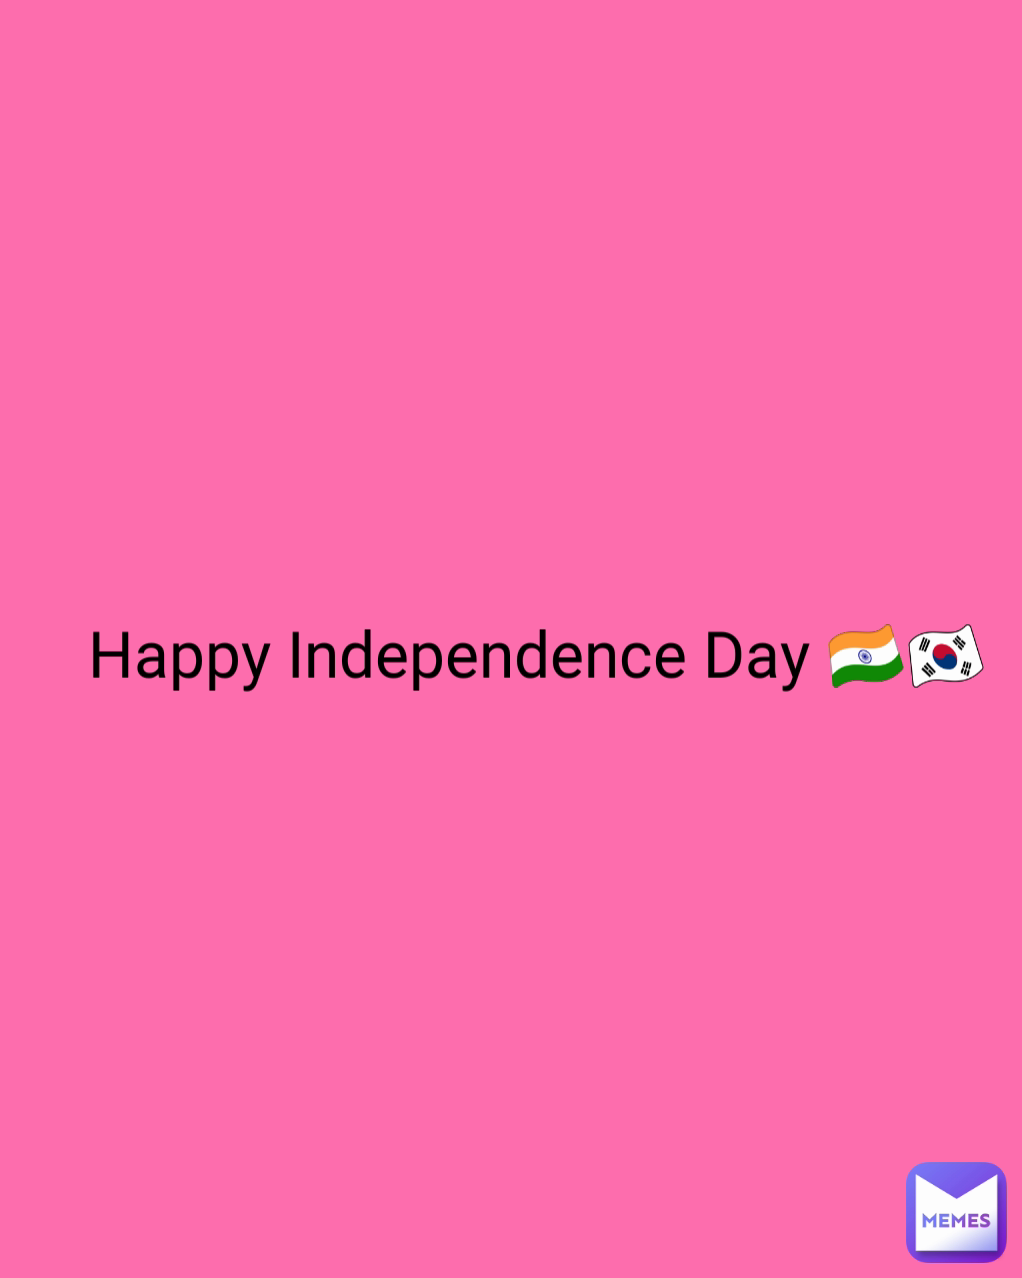 Happy Independence Day 🇮🇳🇰🇷